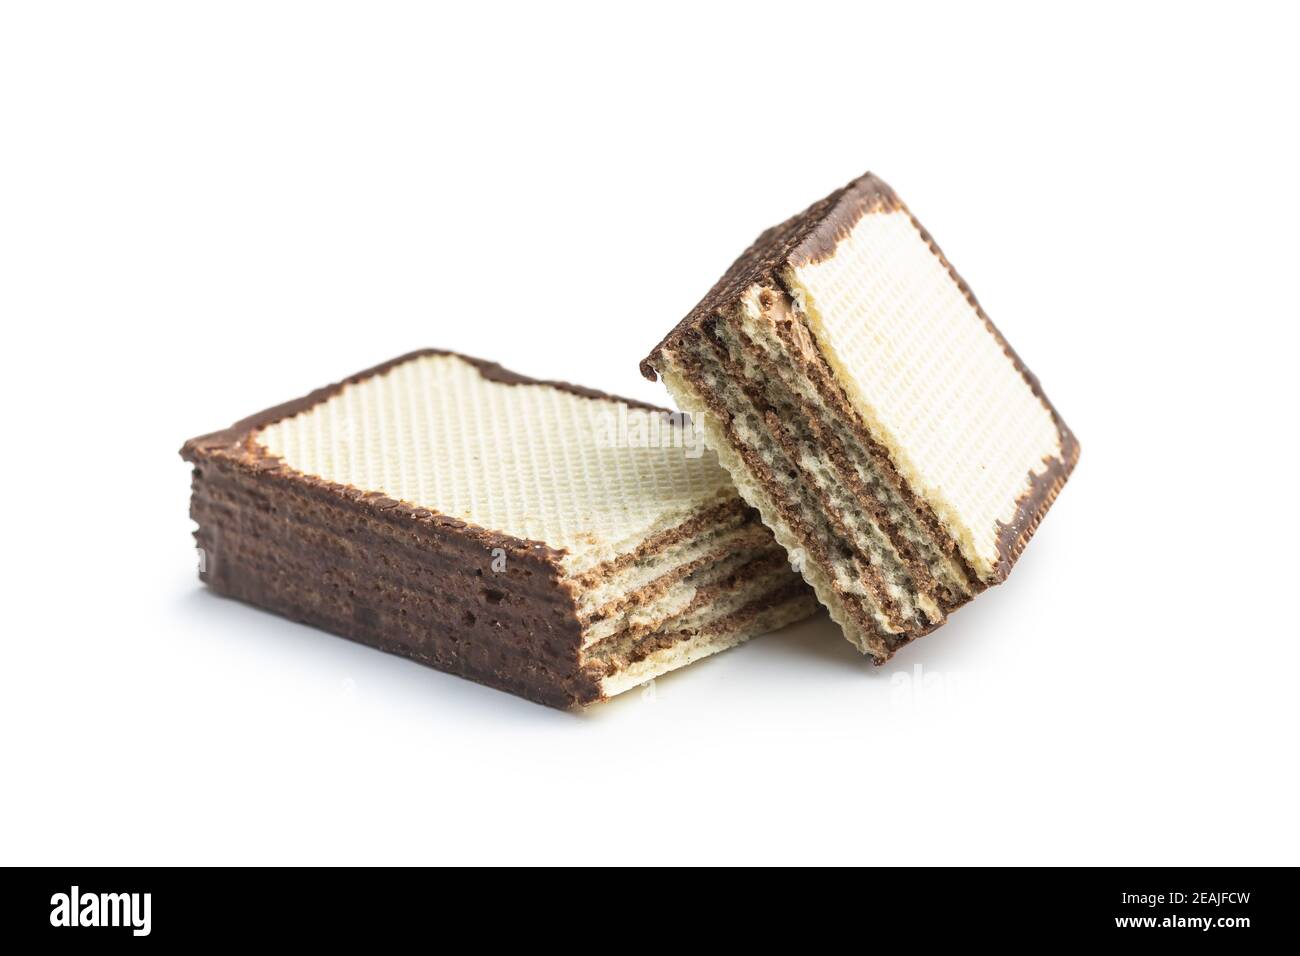 Crispy wafer biscuits filled with chocolate cream. Stock Photo